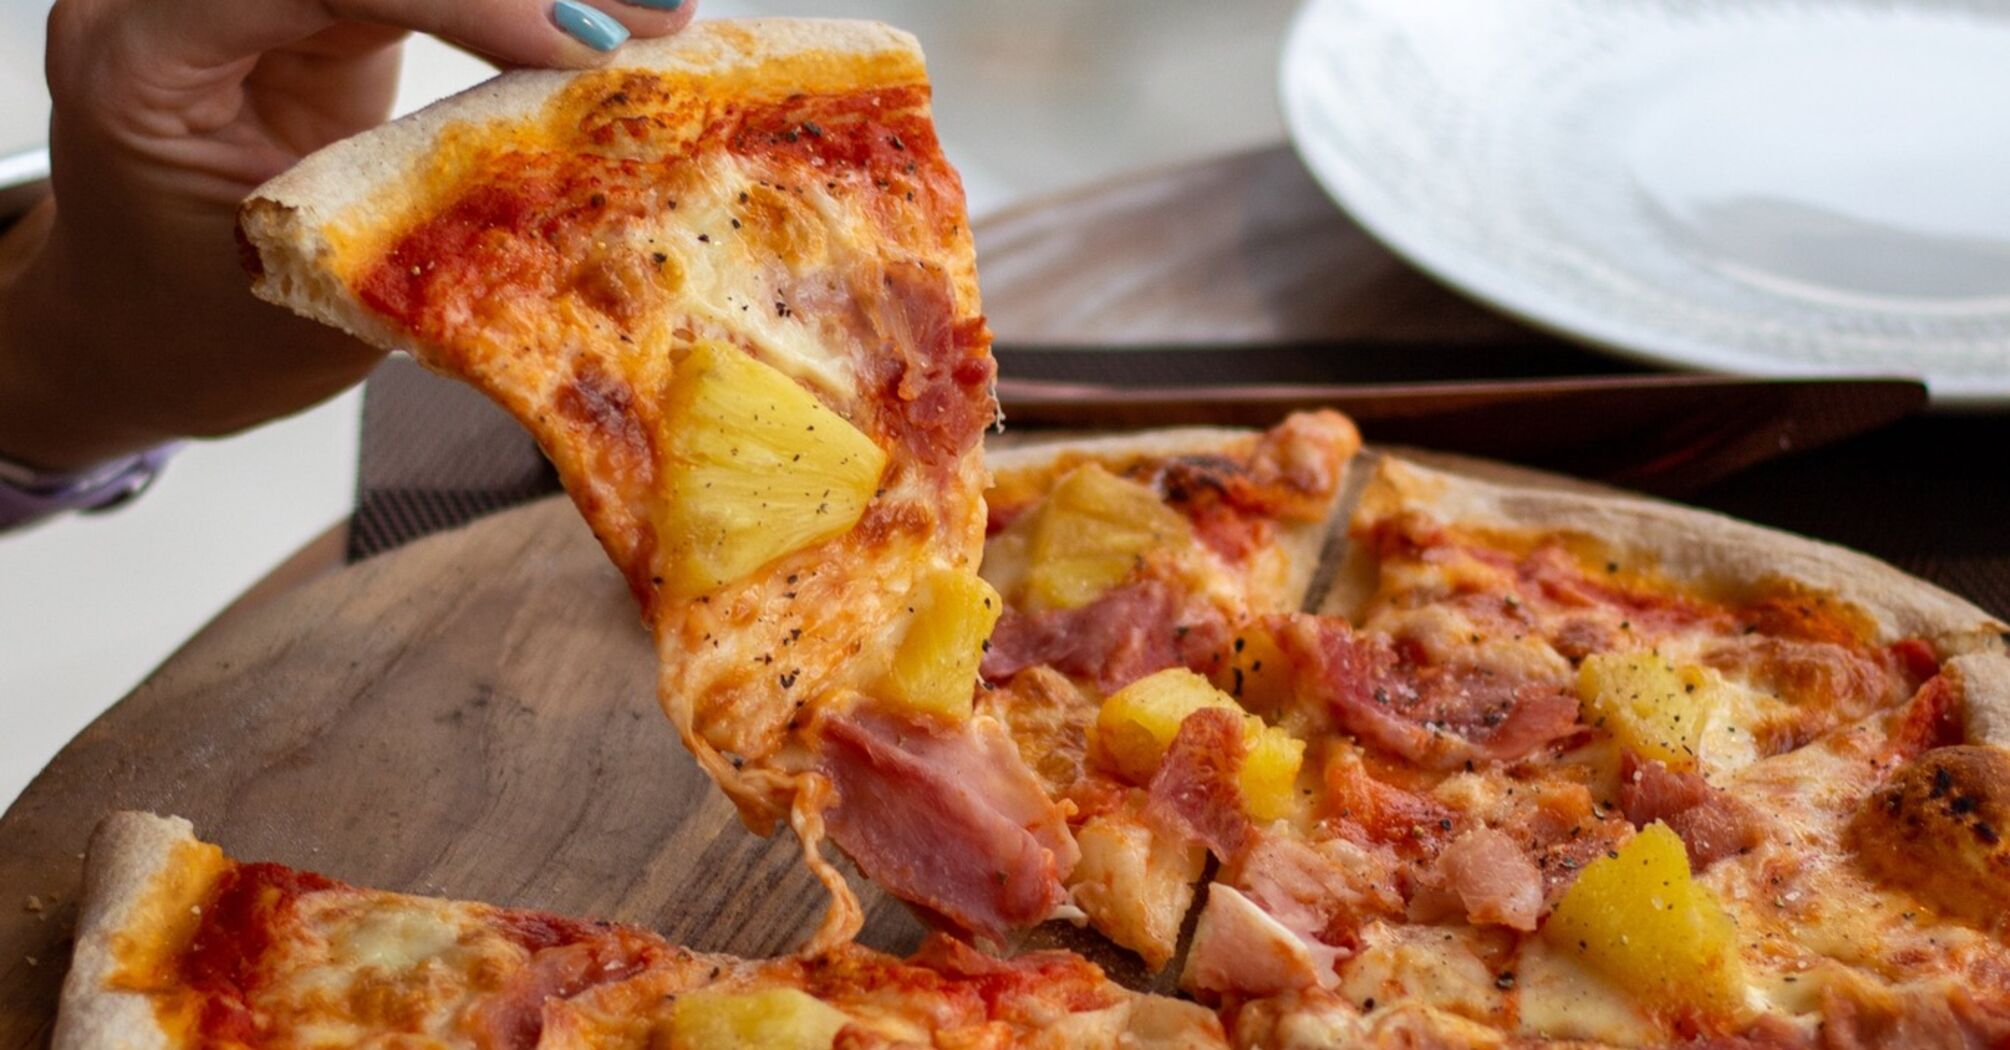 The controversial innovation in pizza recipes has divided opinions among Italians, who scorned the pineapple filling